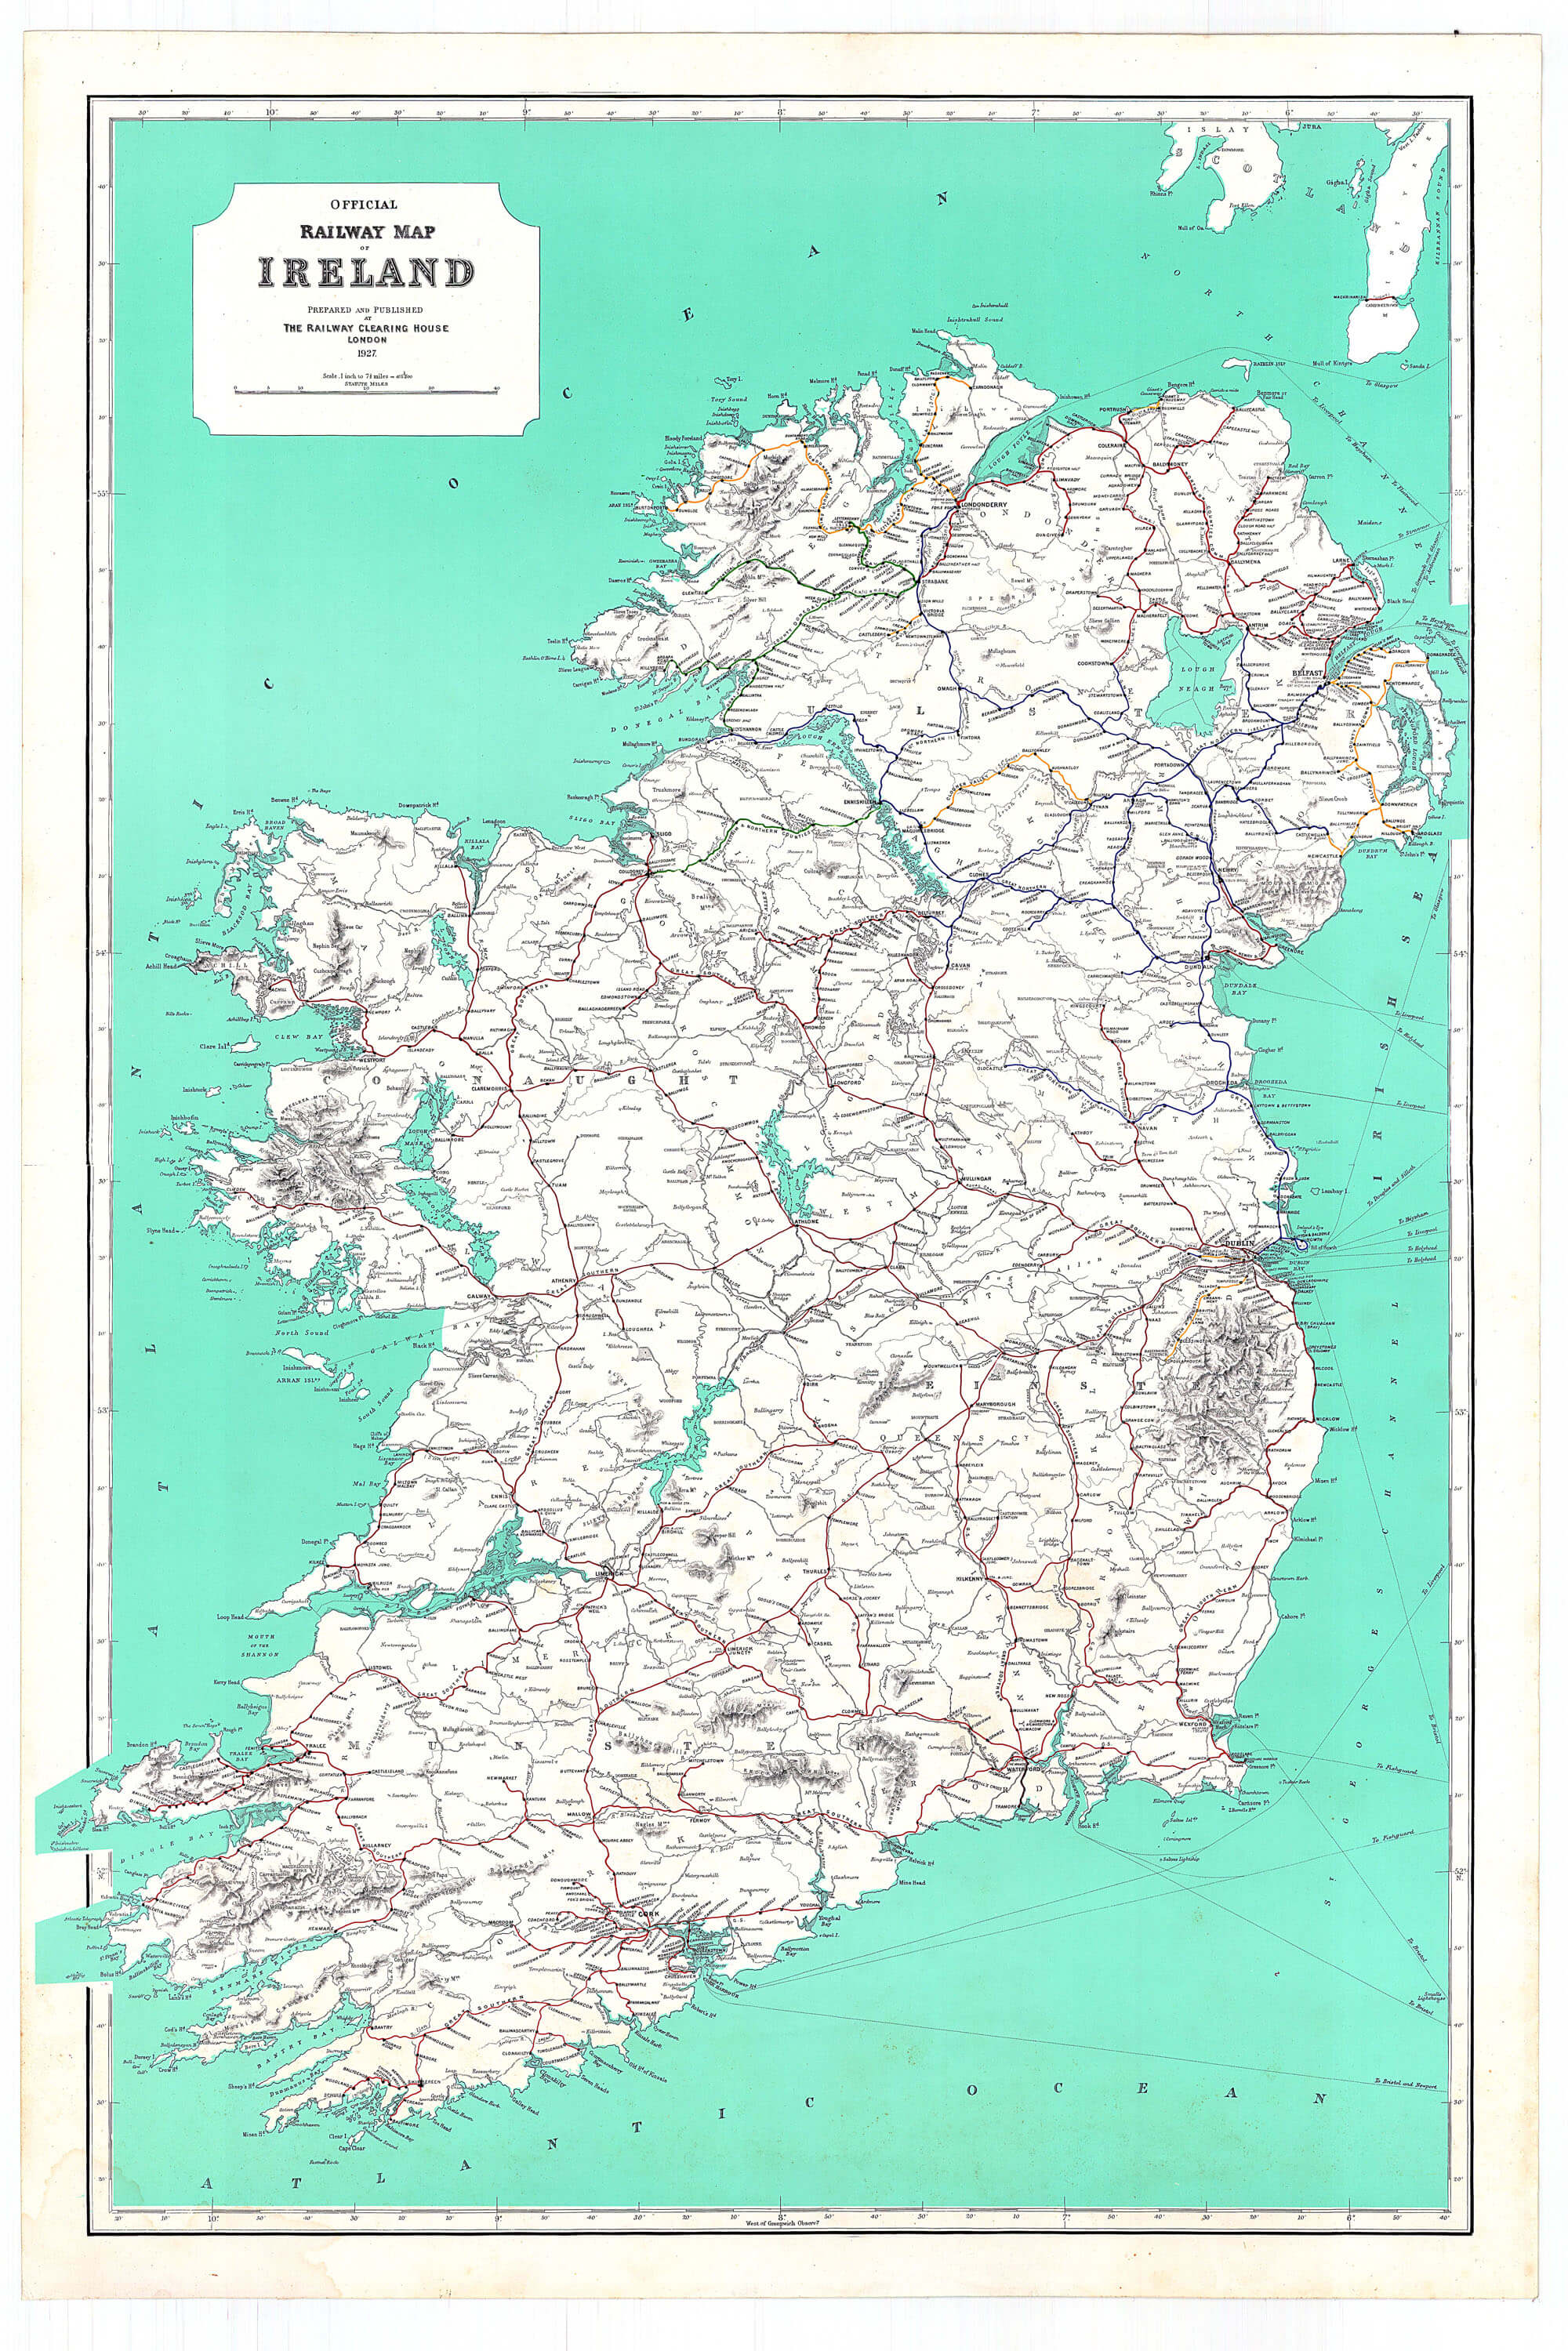 Ireland Maps of Railways – L Brown Collection